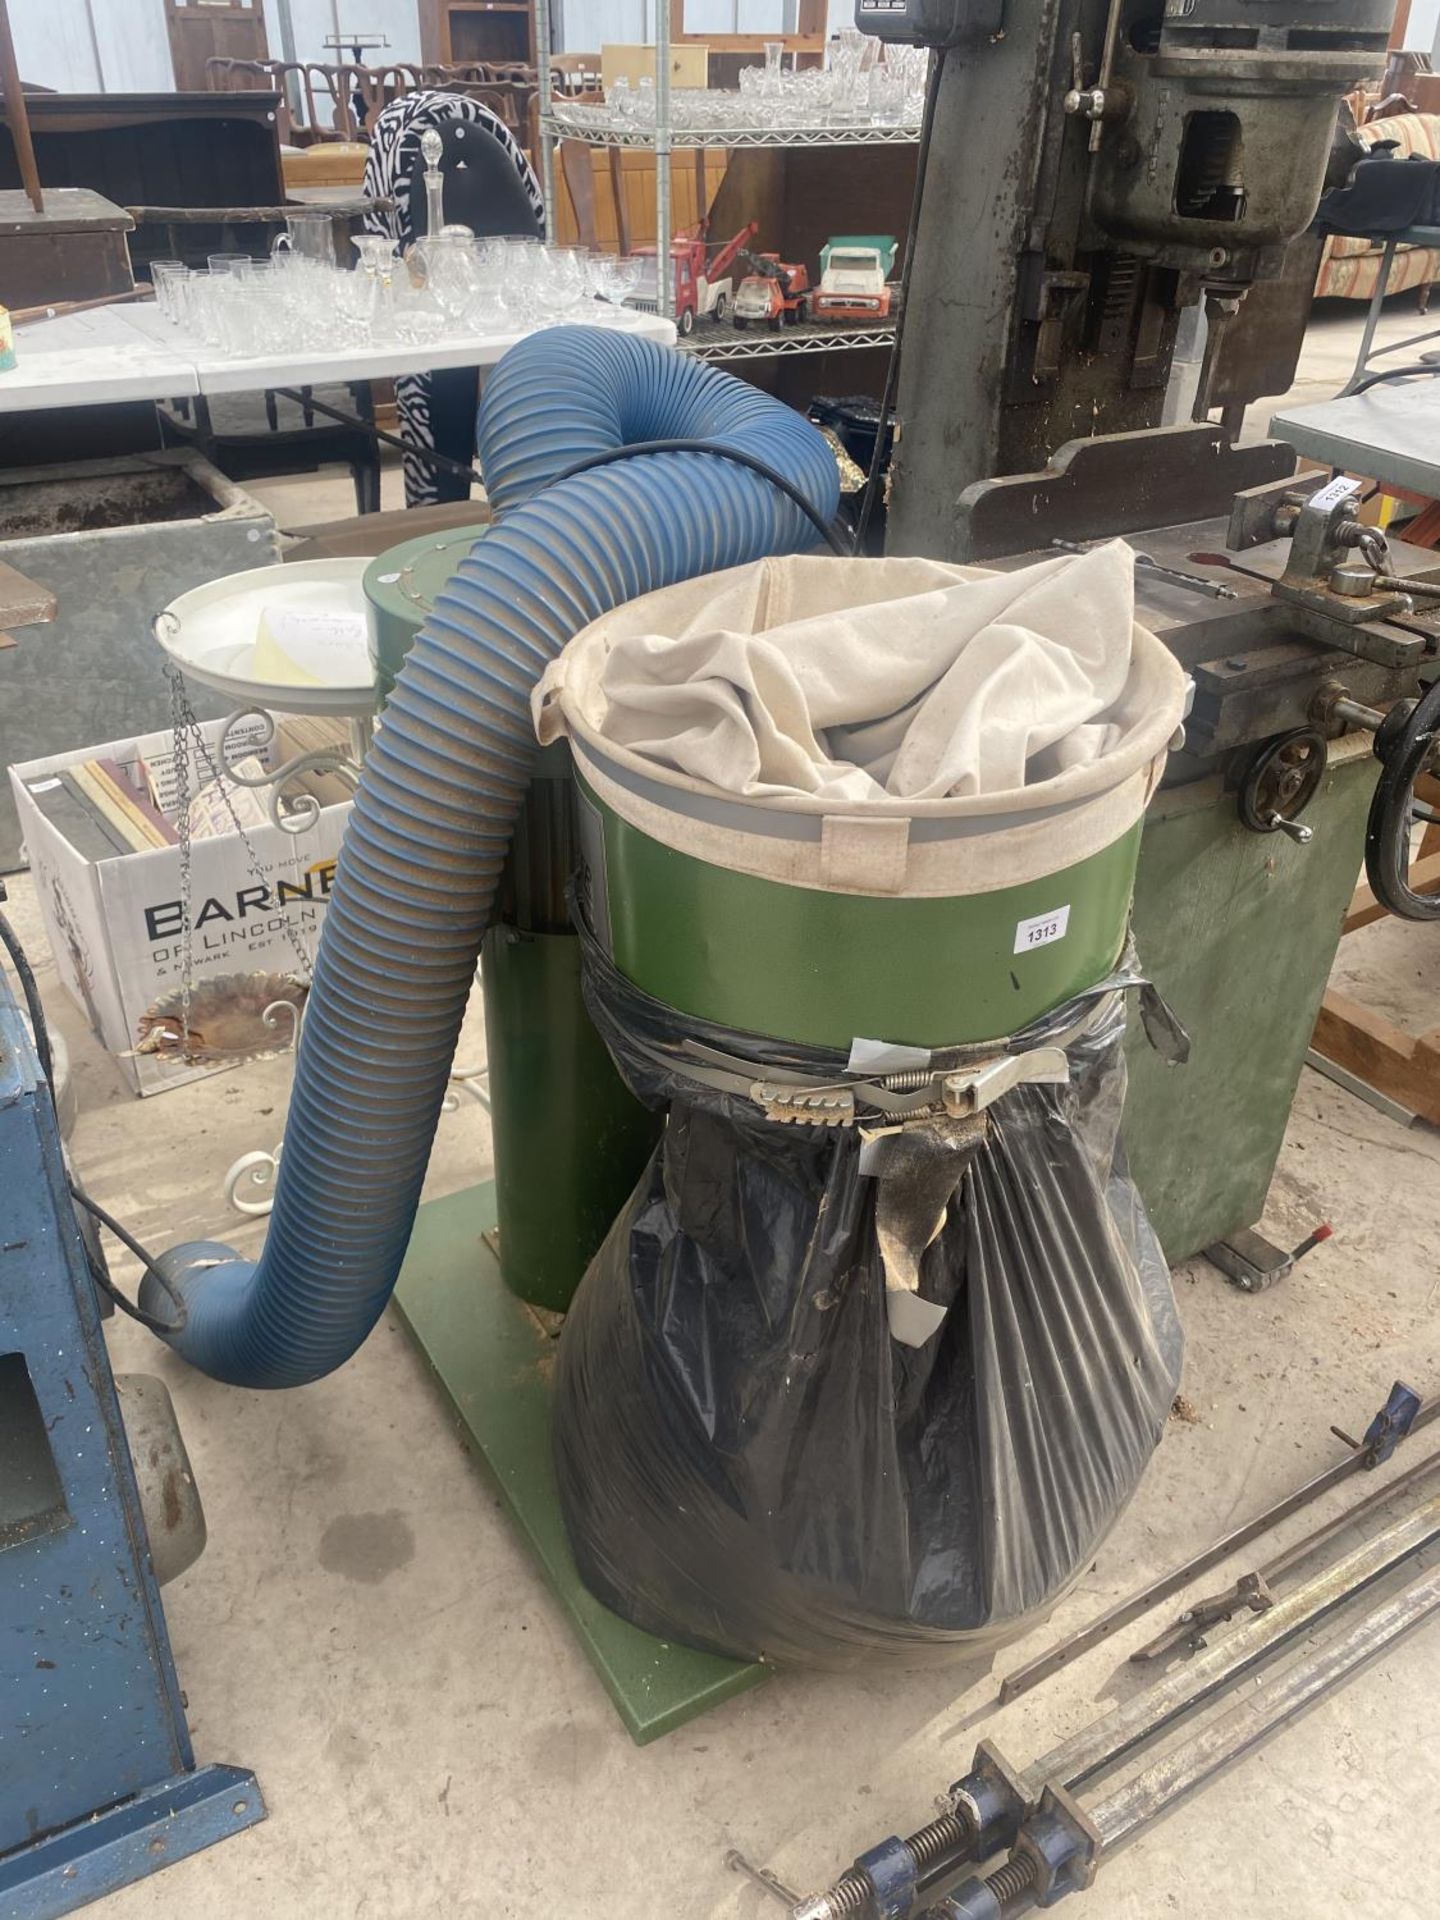 A WOODWORKER W890 DUST EXTRACTOR BELIEVED IN WORKING ORDER BUT NO WARRANTY